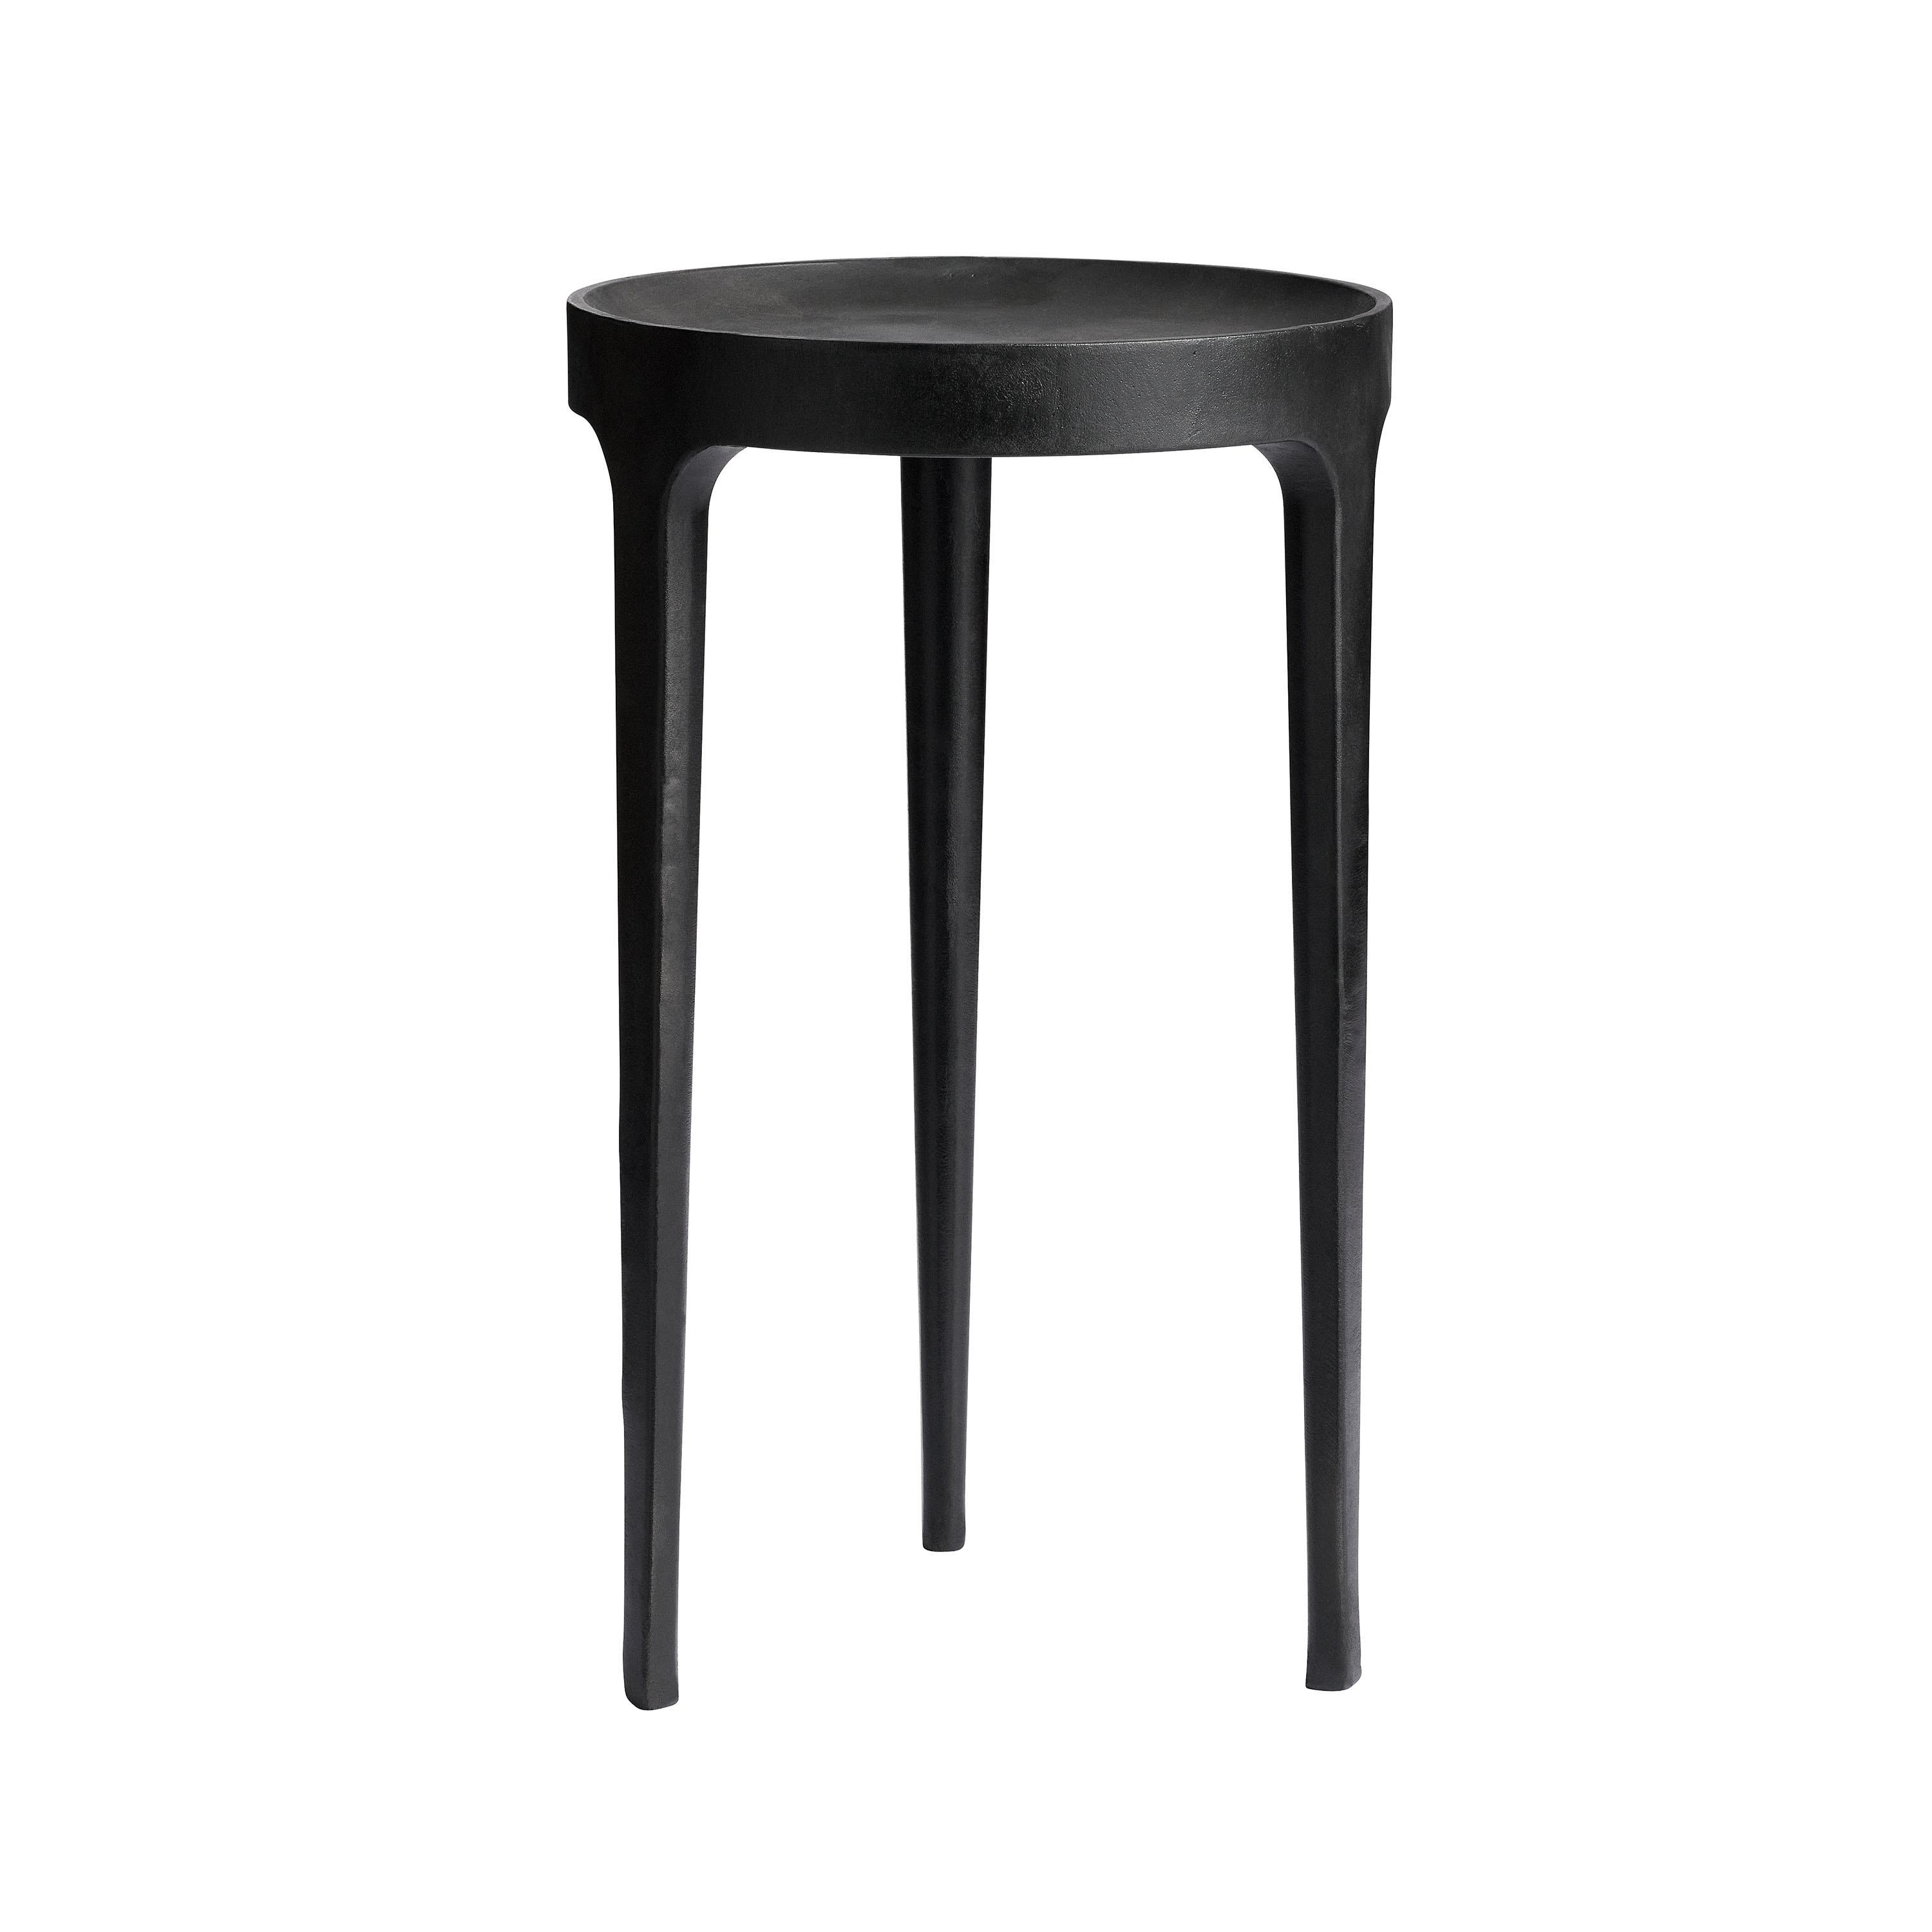 Danish Contemporary Side Table 'Ghost' by Fogia, Black Aluminium For Sale